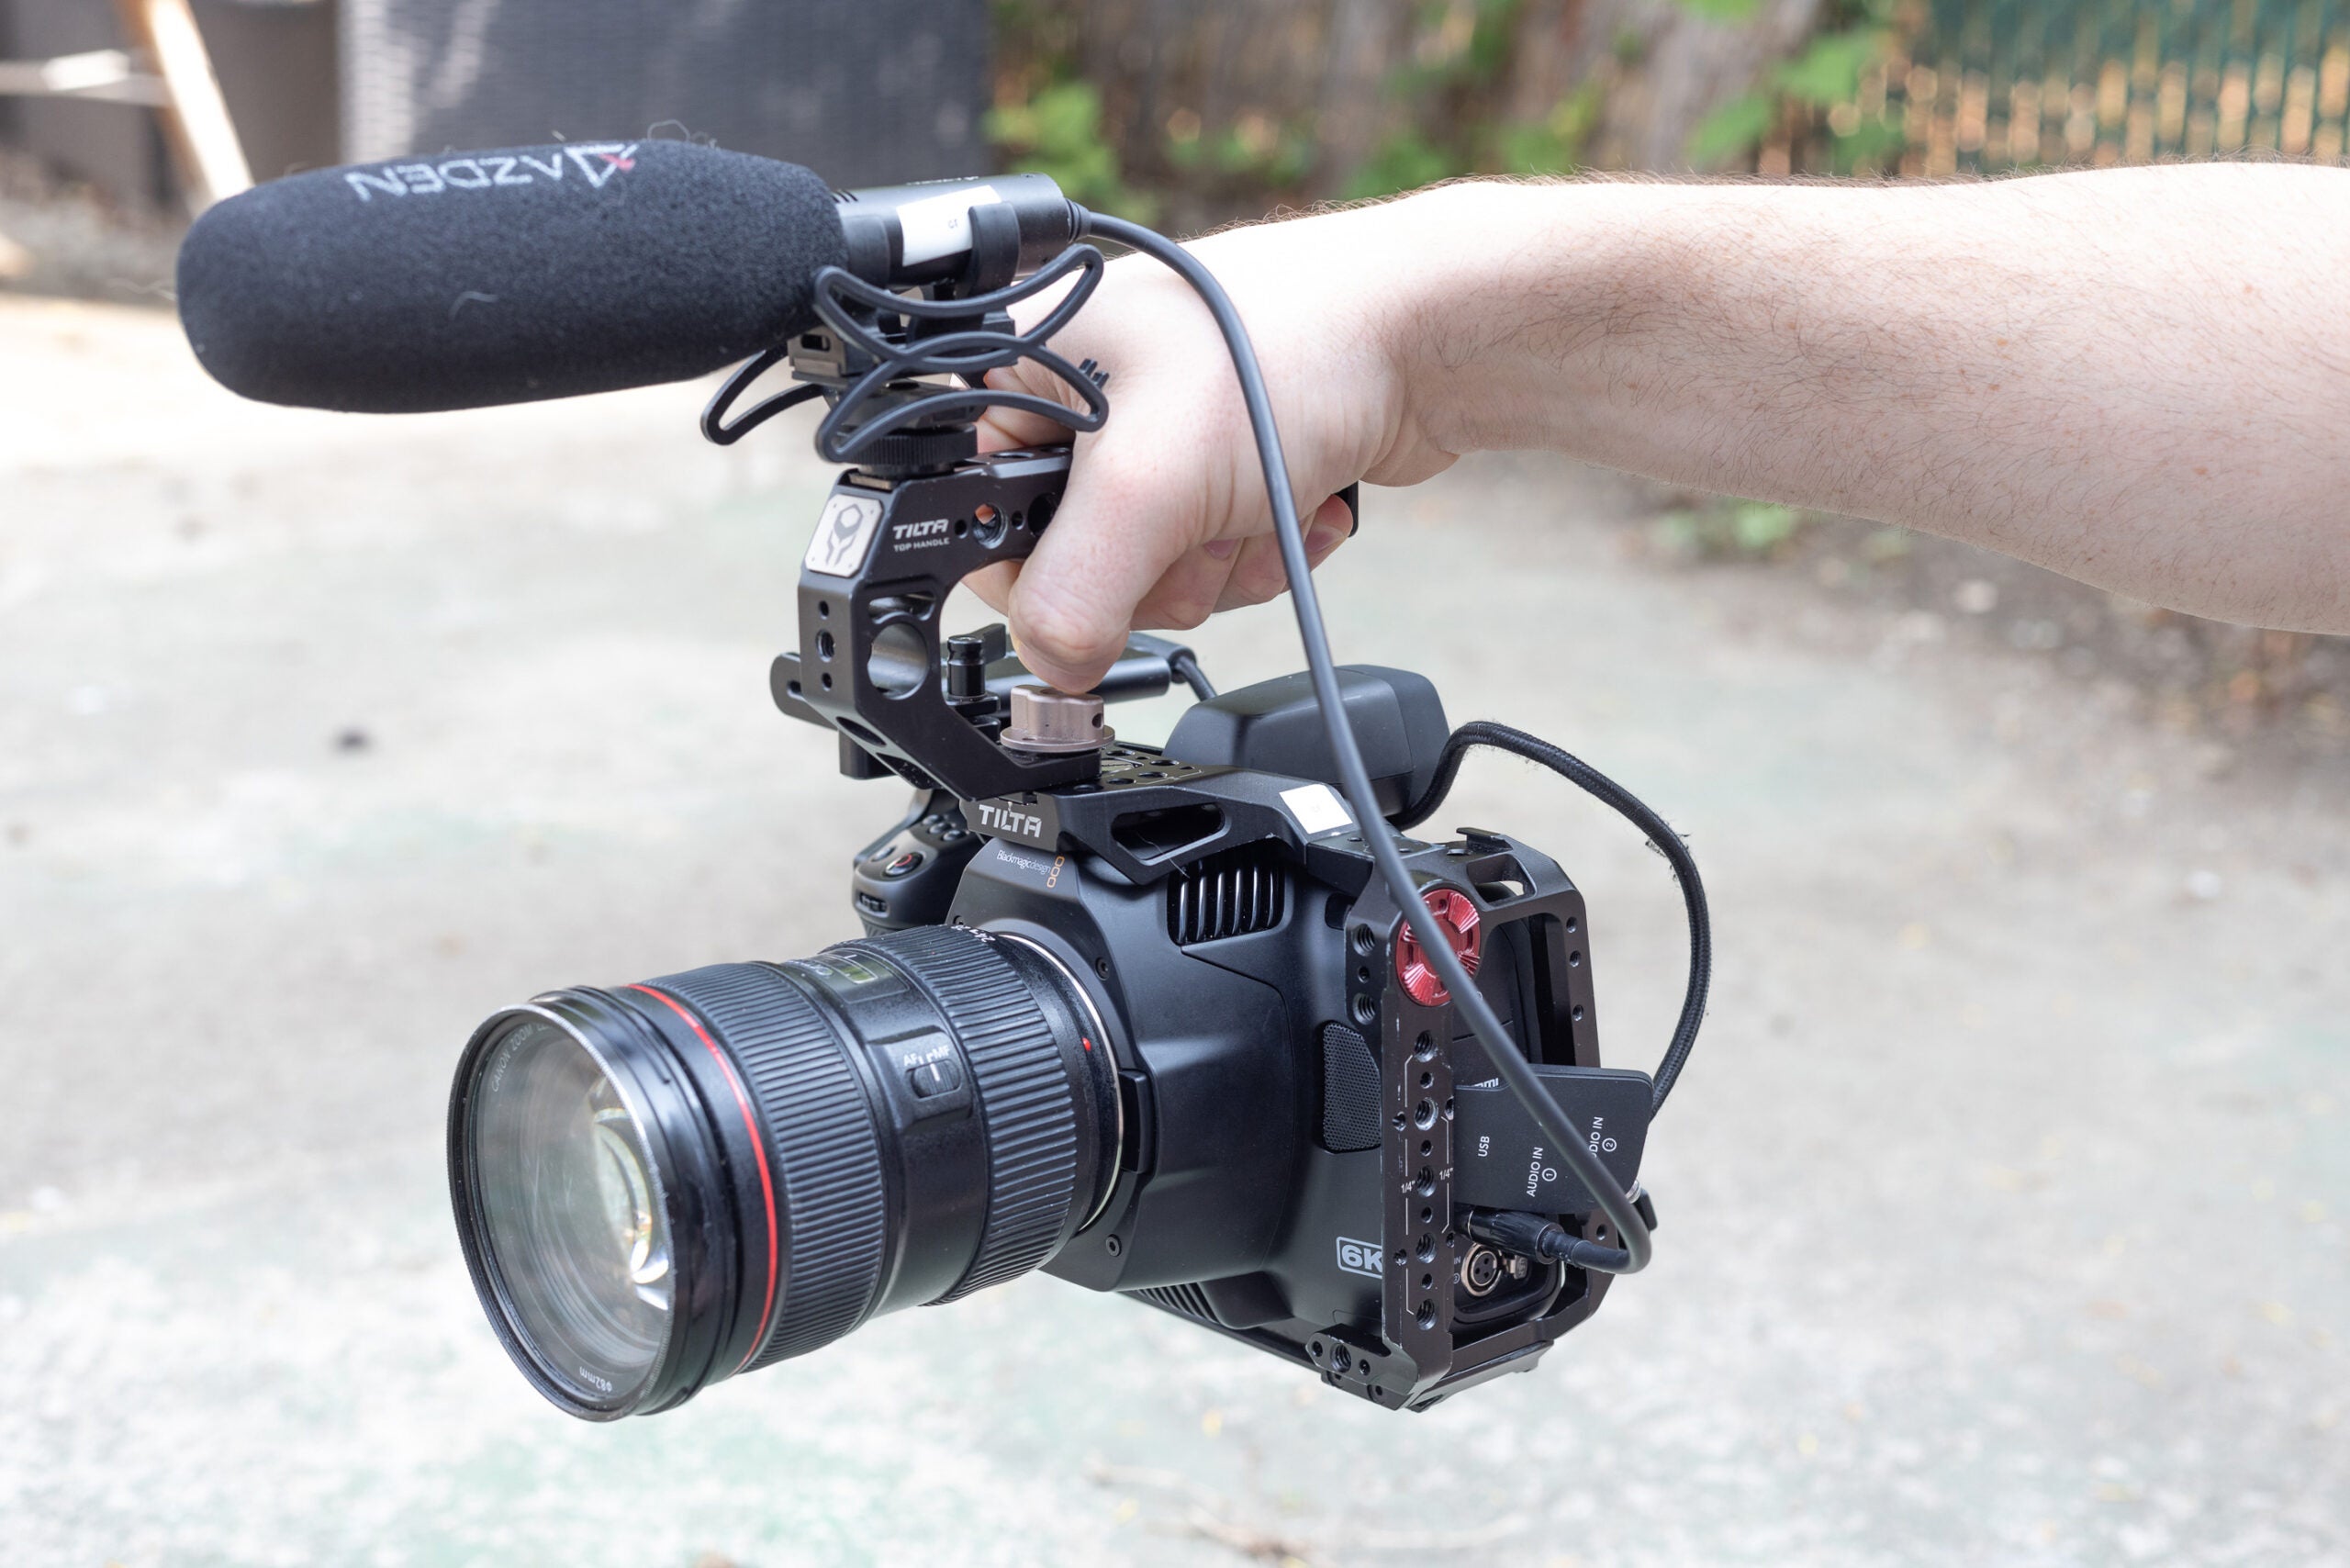 A Blackmagic Pocket Cinema Camera 6K G2 in a cage with mic